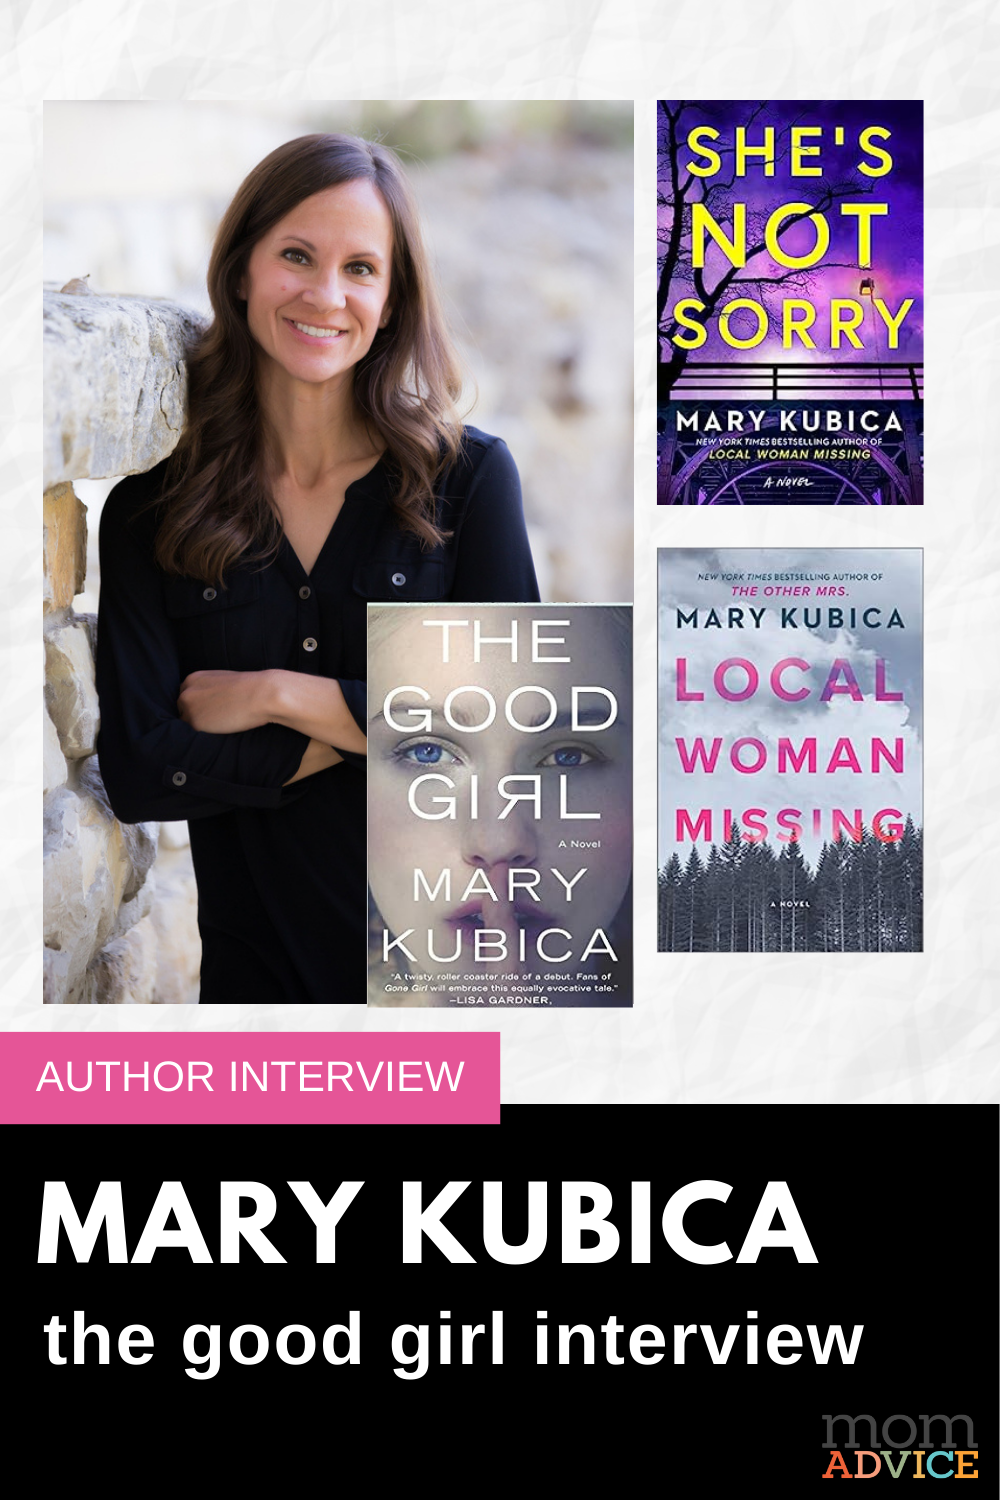 The Best Mary Kubica Books (Exclusive Author Interview)